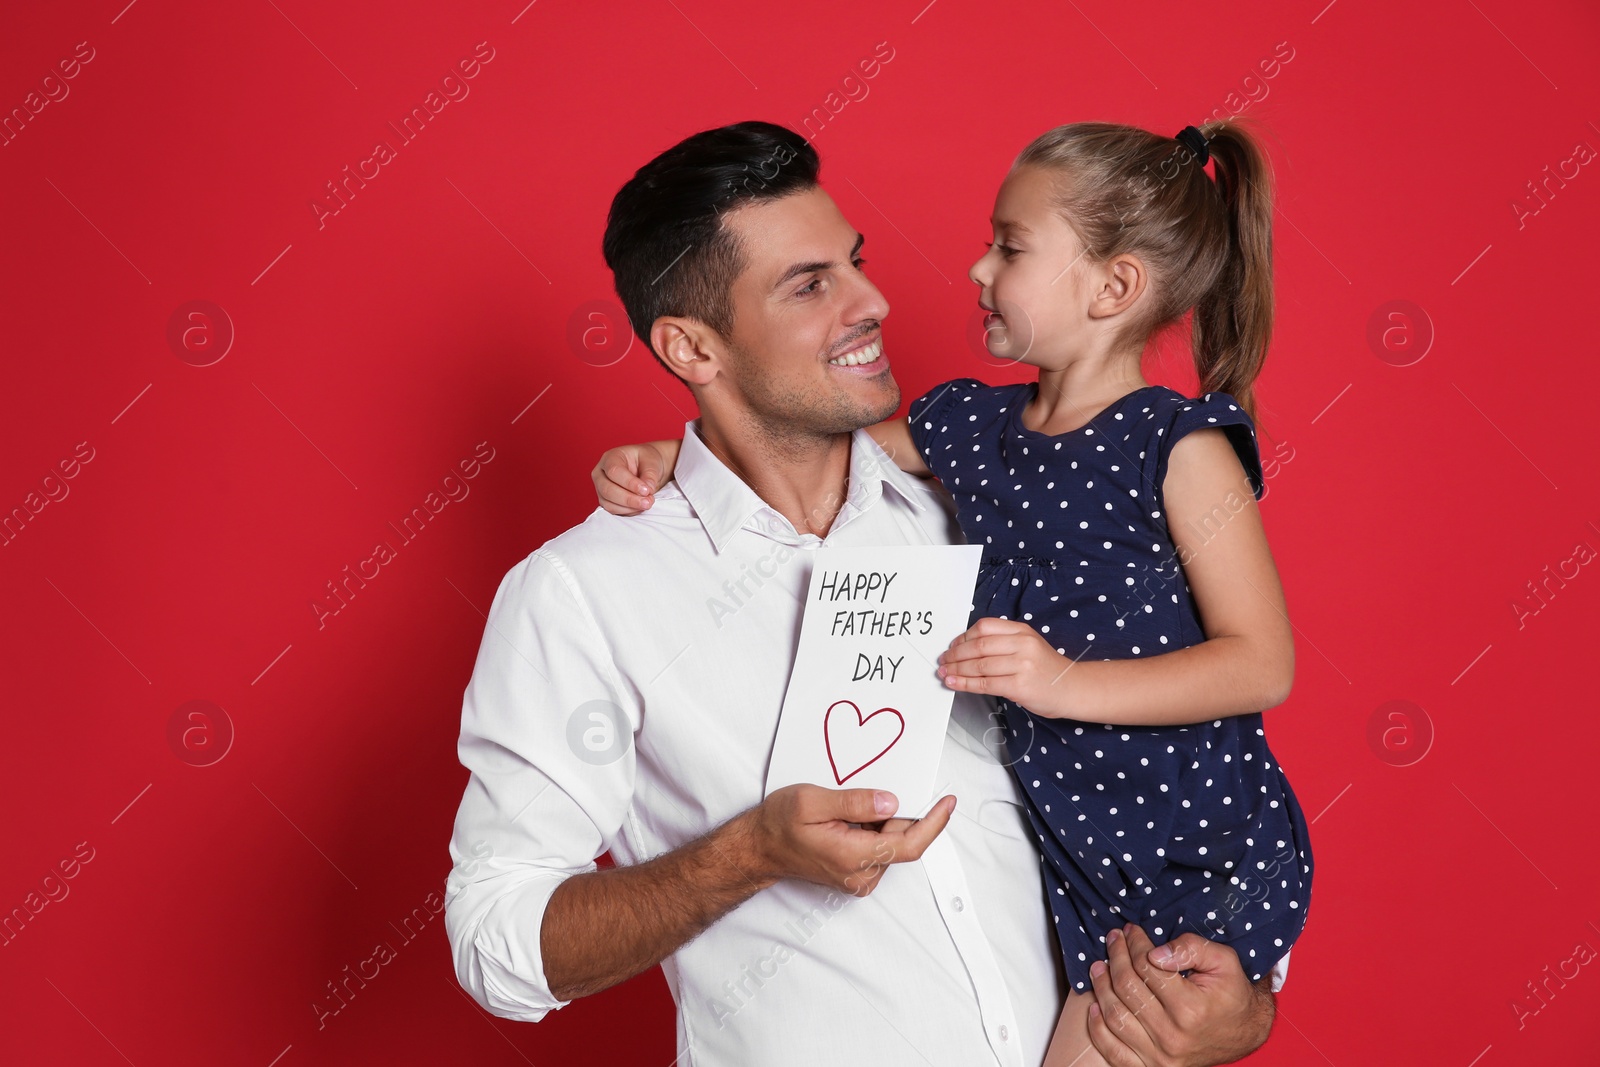 Photo of Little girl greeting her dad with Father's Day on red background